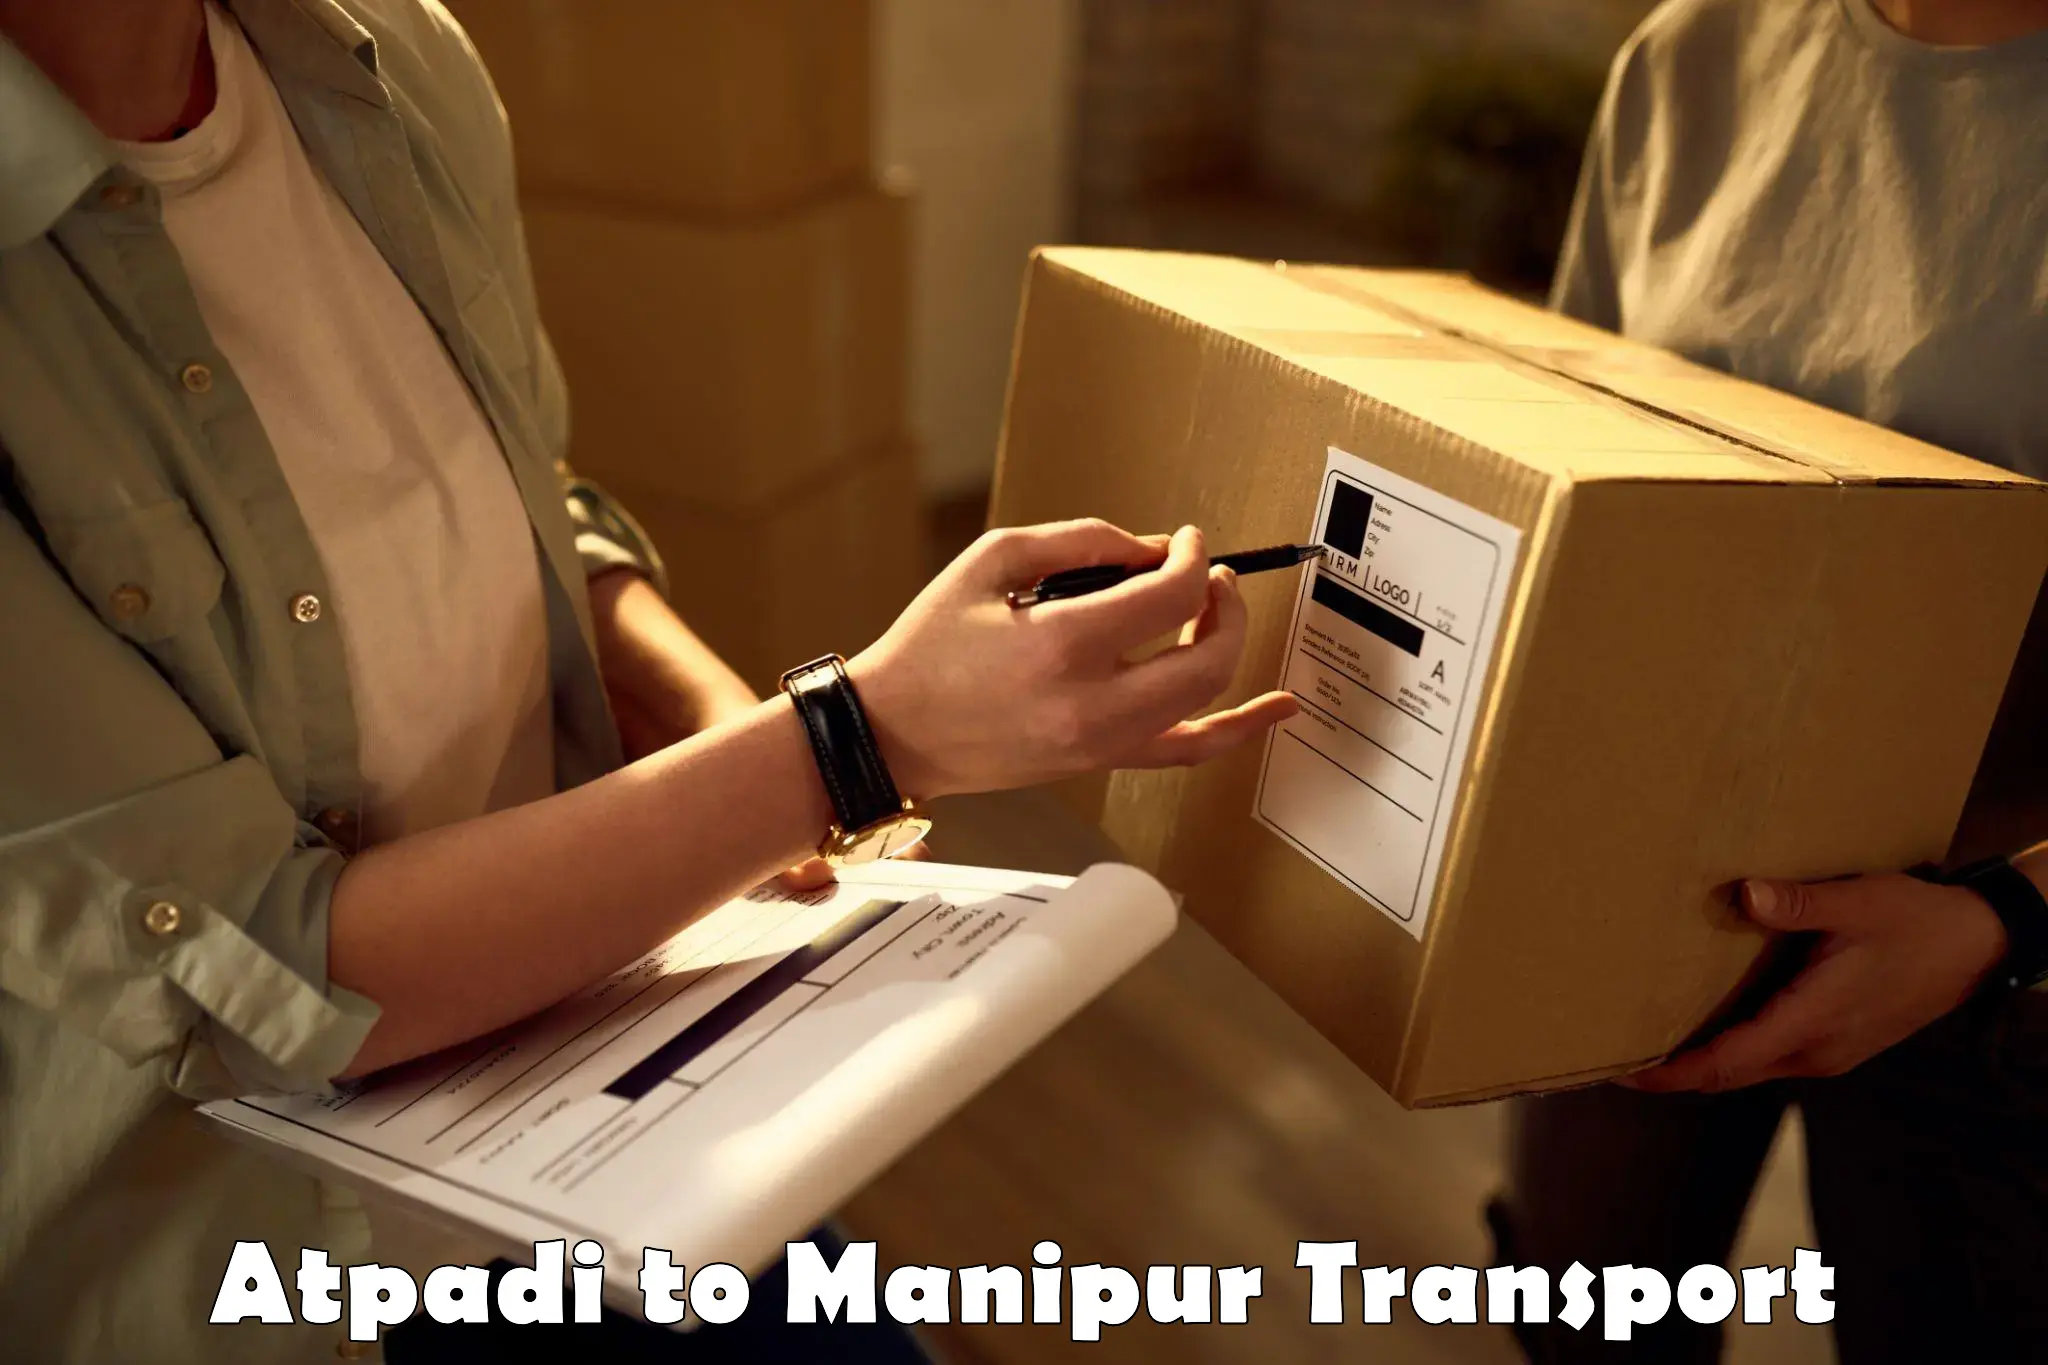 Commercial transport service Atpadi to Manipur